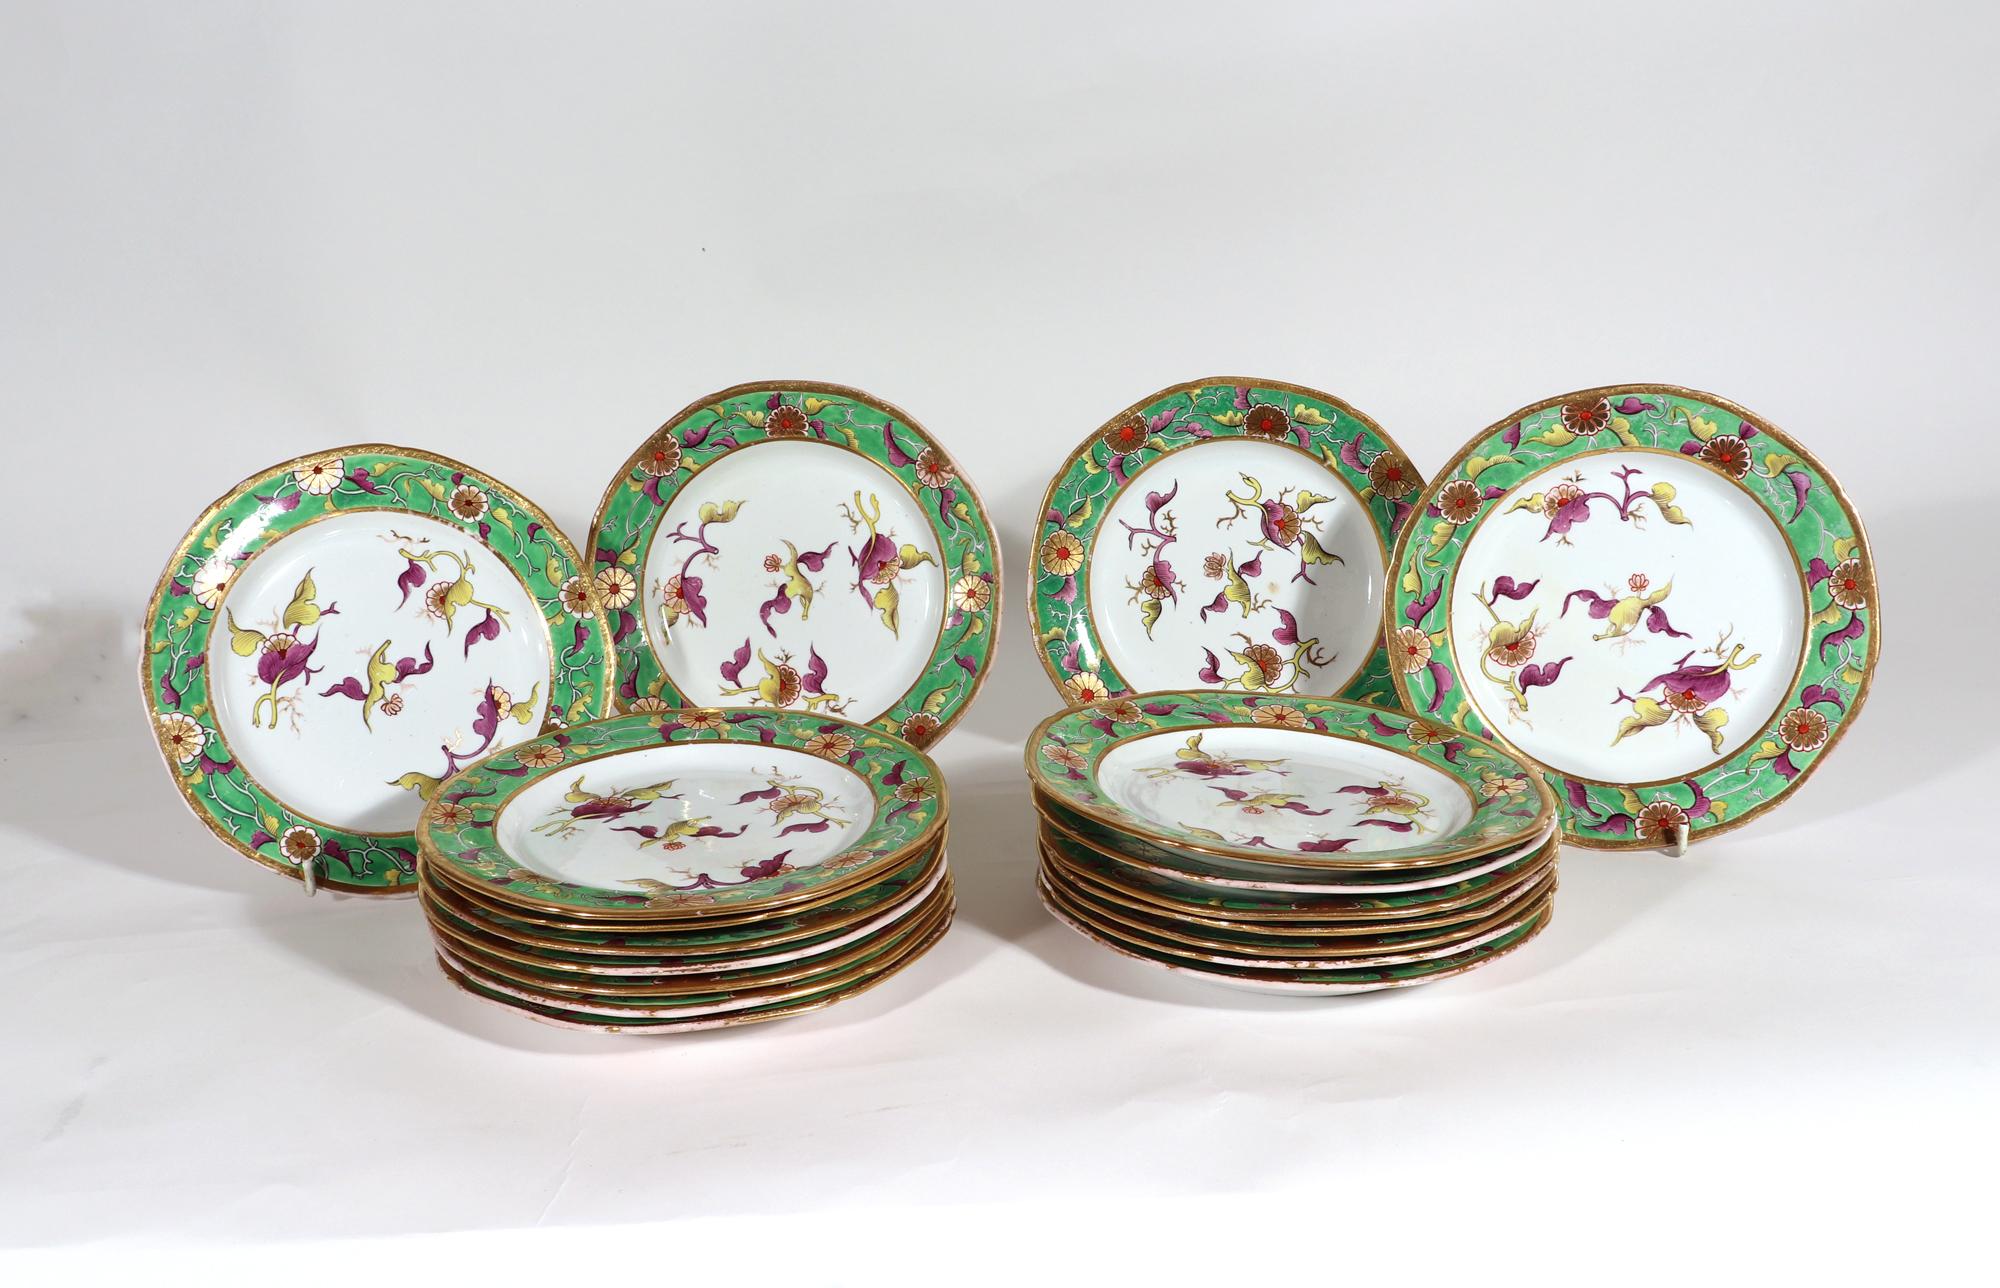 19th Century Spode Porcelain Dessert Service, Pattern # 302, Thirty Two Pieces